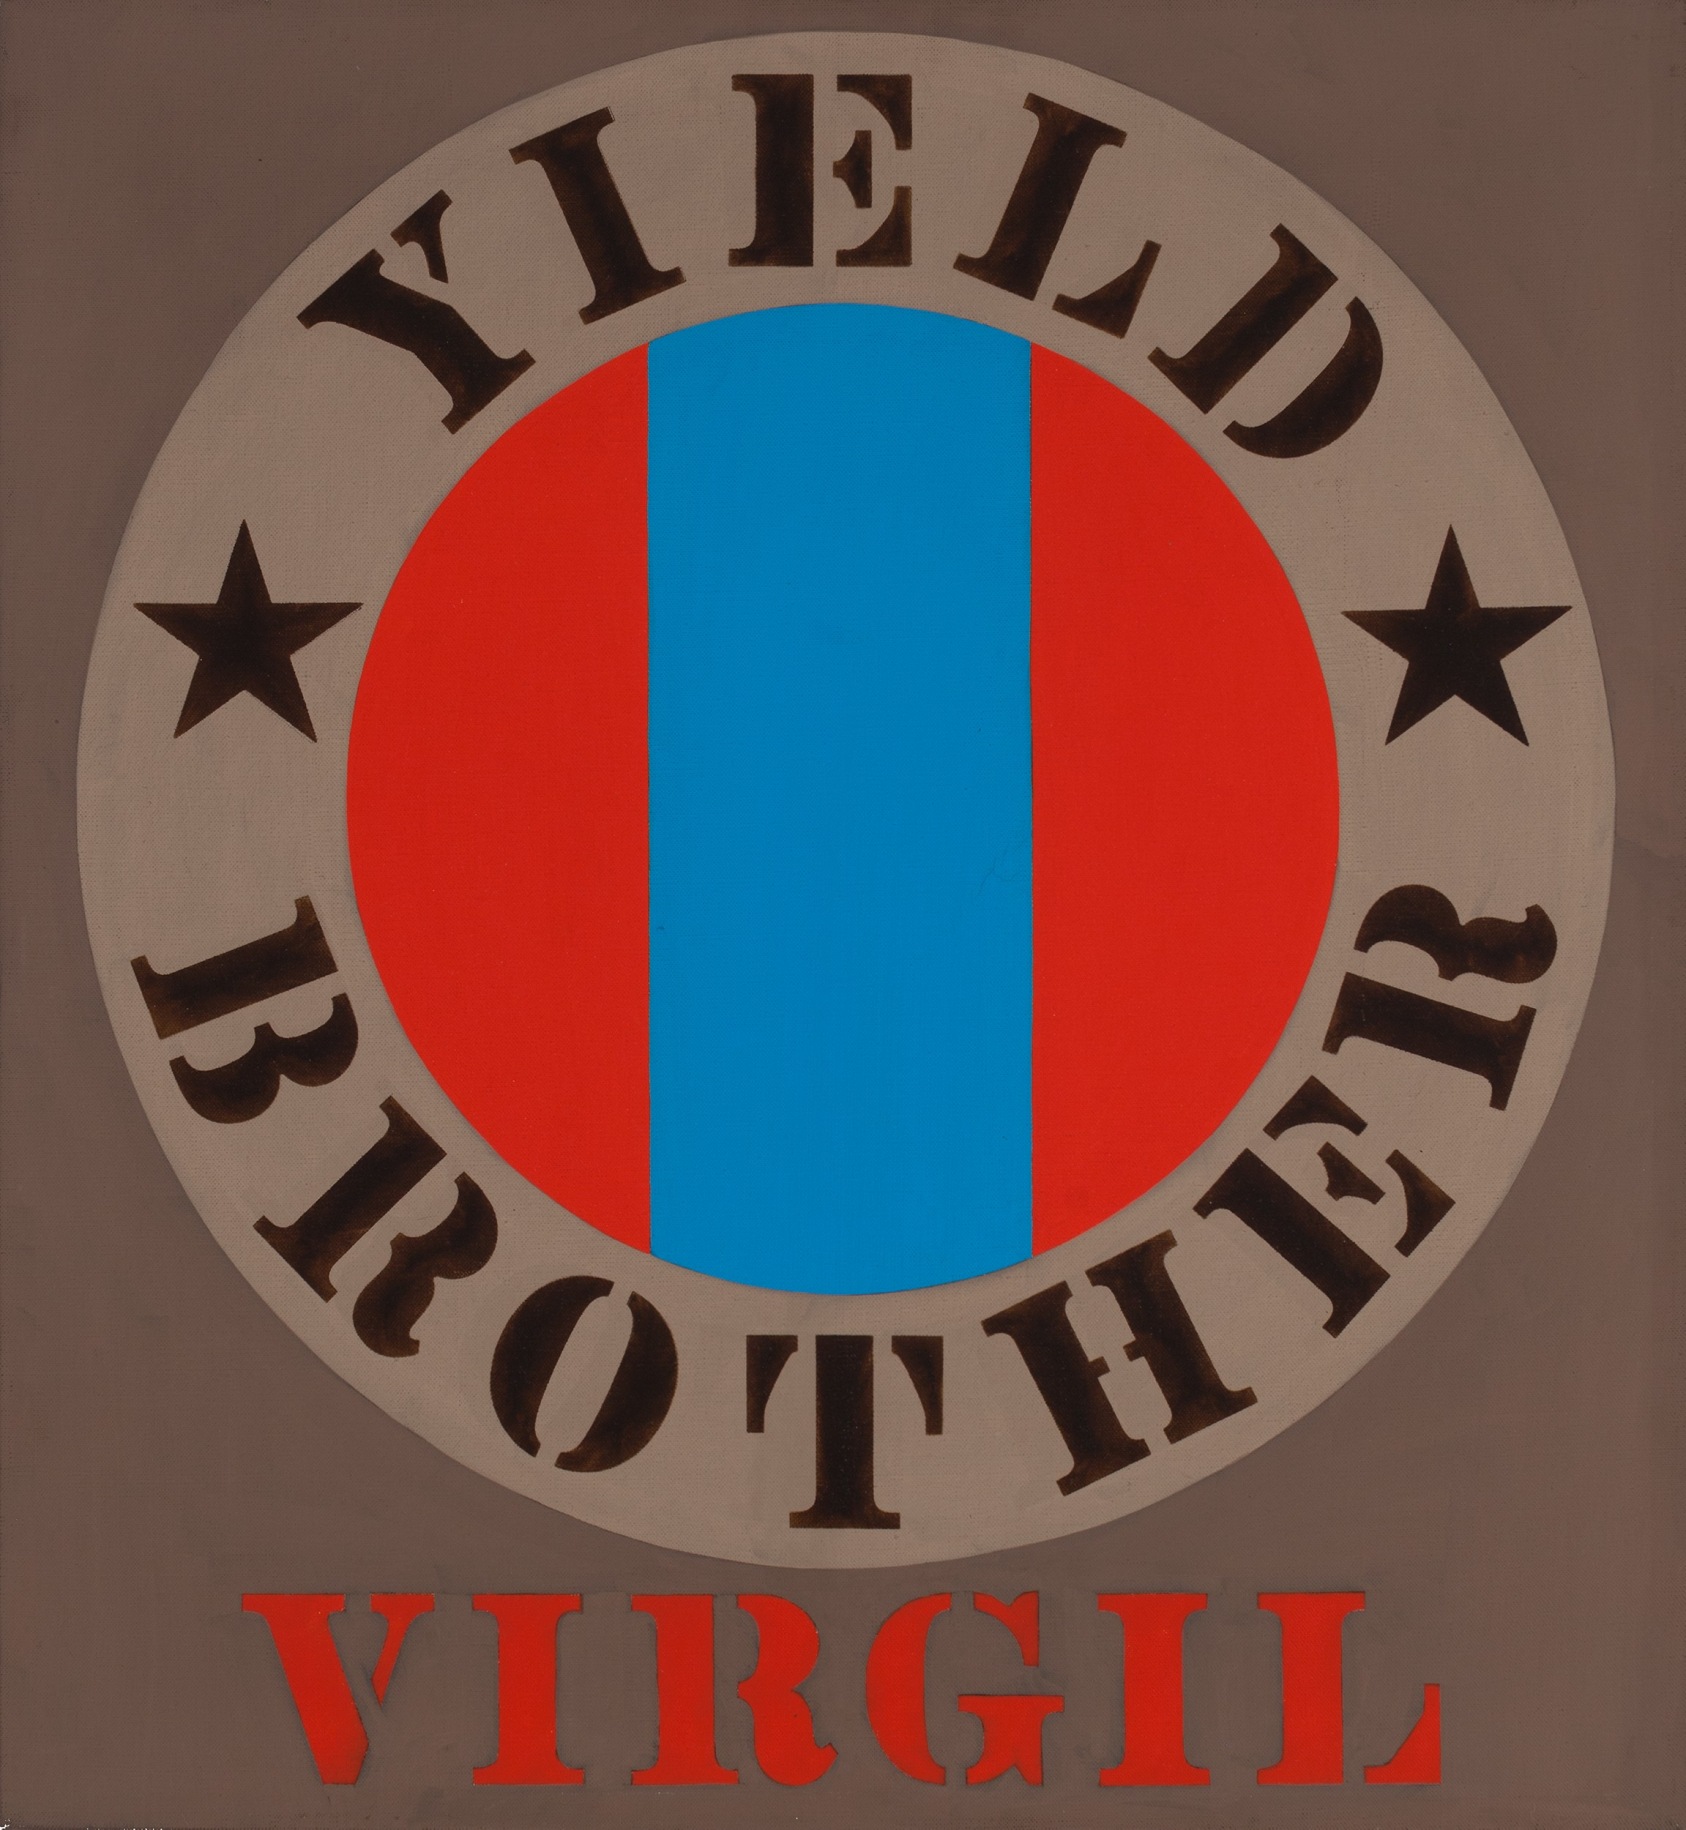 Yield Brother Virgil is a 24 by 22 inch brown painting with Virgil painted in red stenciled letters across the bottom center of the canvas. Above it is a red circle with a blue vertical band, surrounded by a lighter brown ring with the words &quot;Yield&quot; and &quot;Brother&quot; painted in a black stencil, and a black star in between the words.